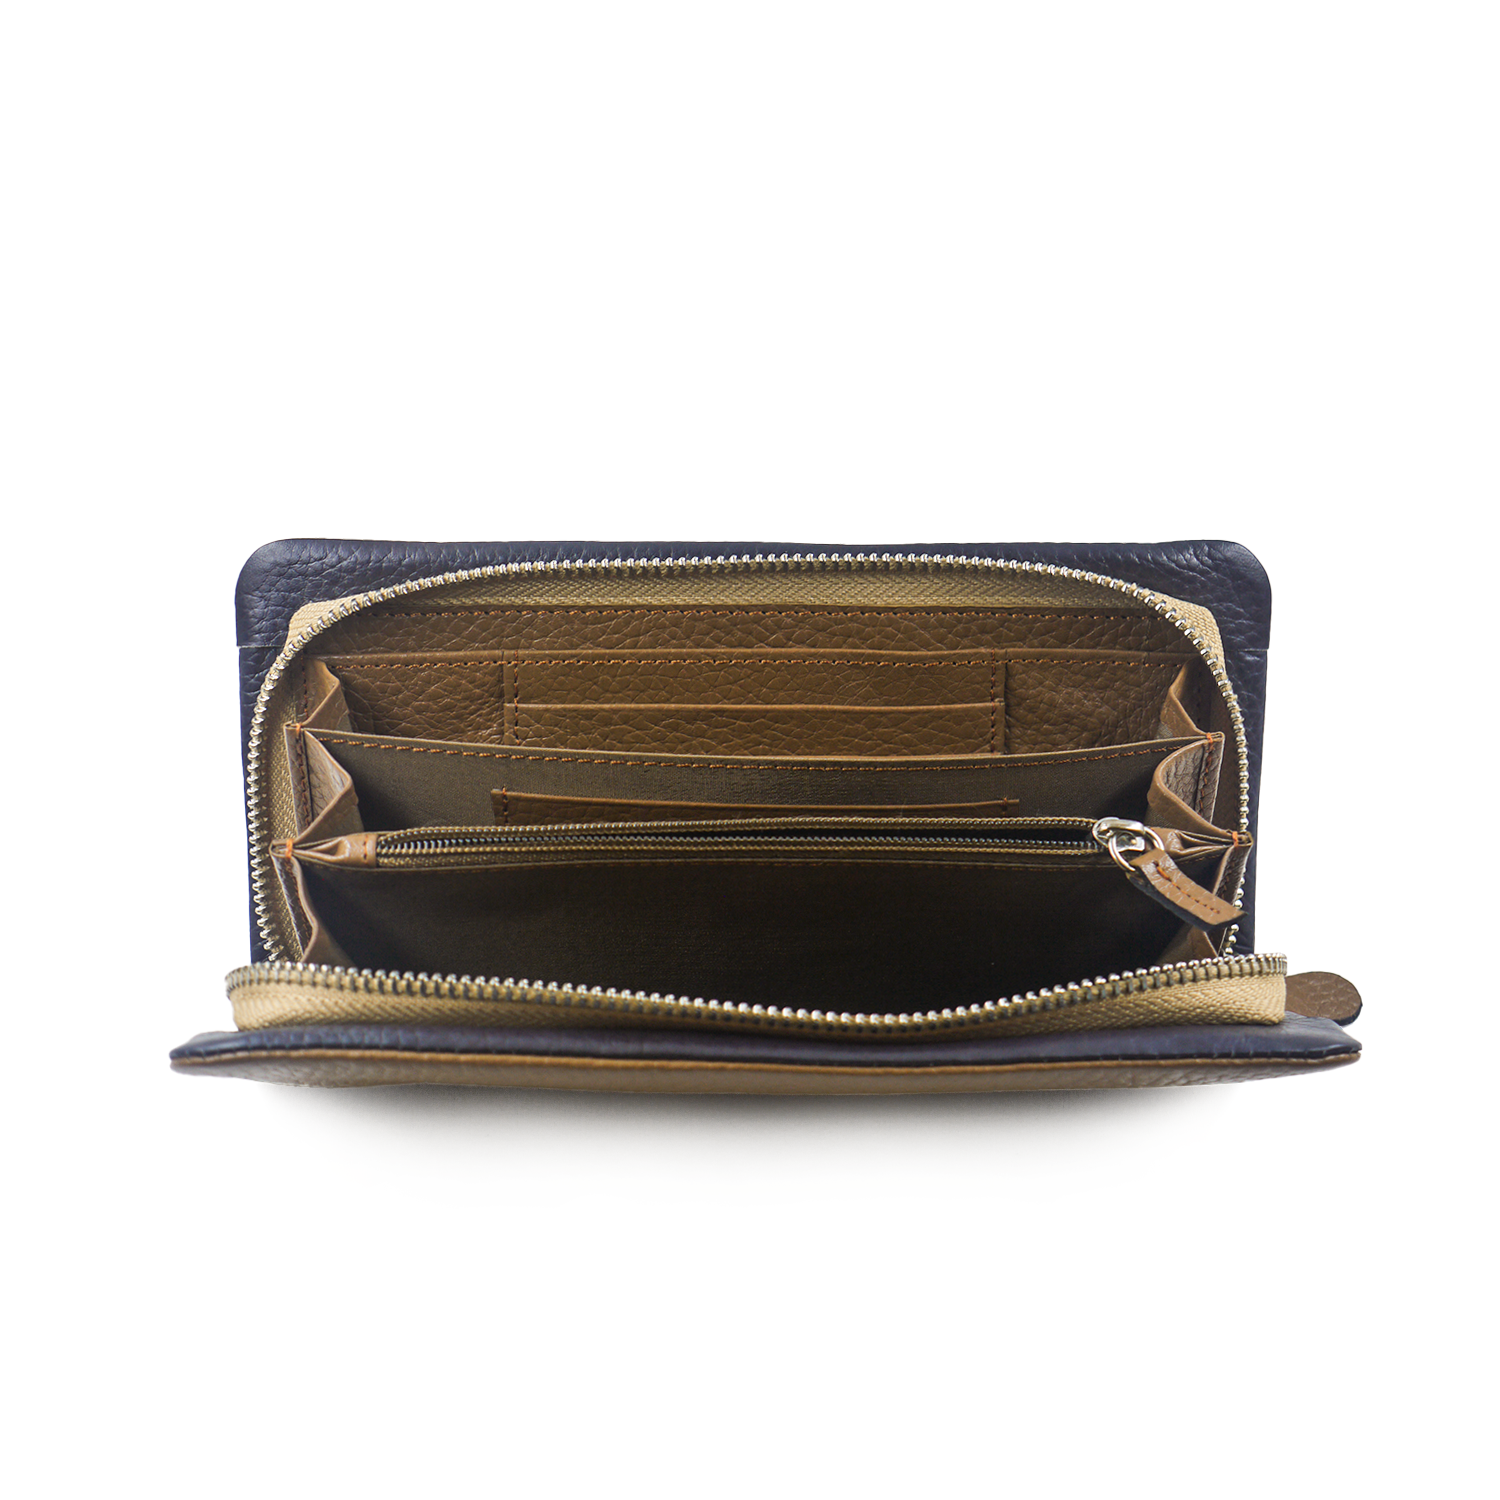 Leather Clutch manufacturers - Check Now!